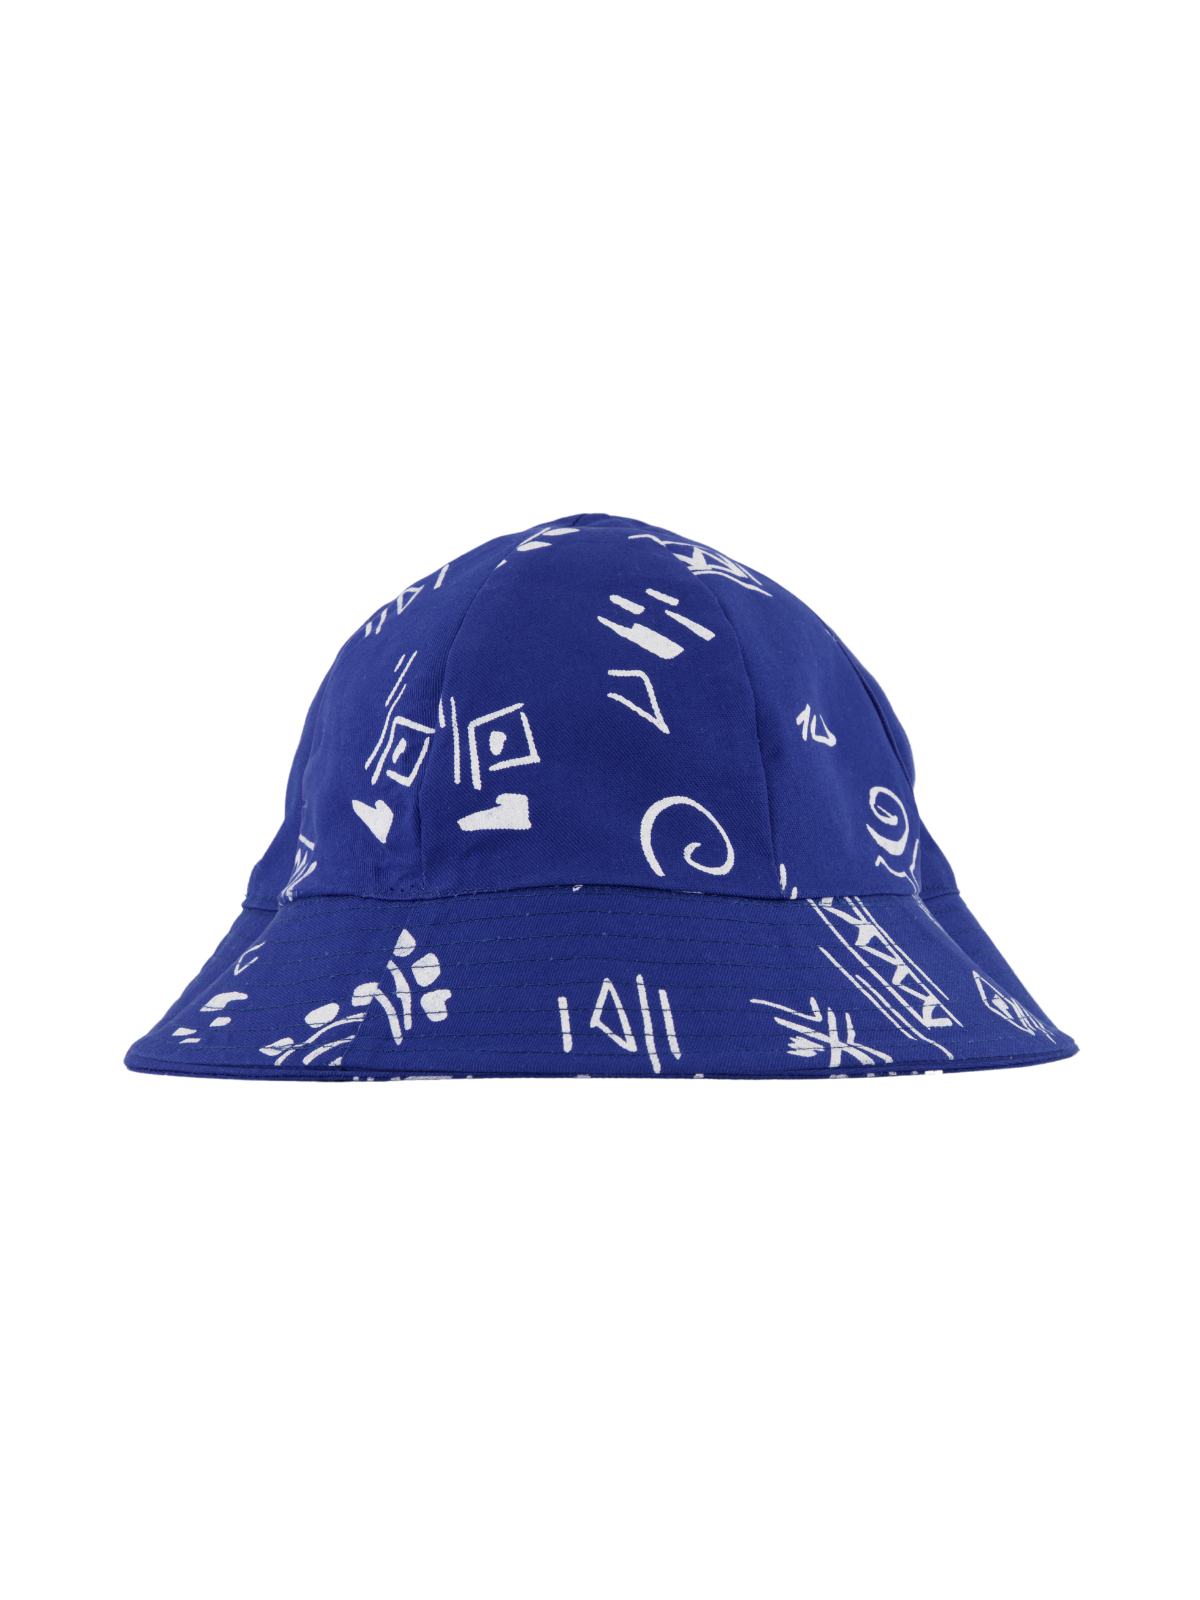 Reversible 6 Panel Royal - Artclub and Friends